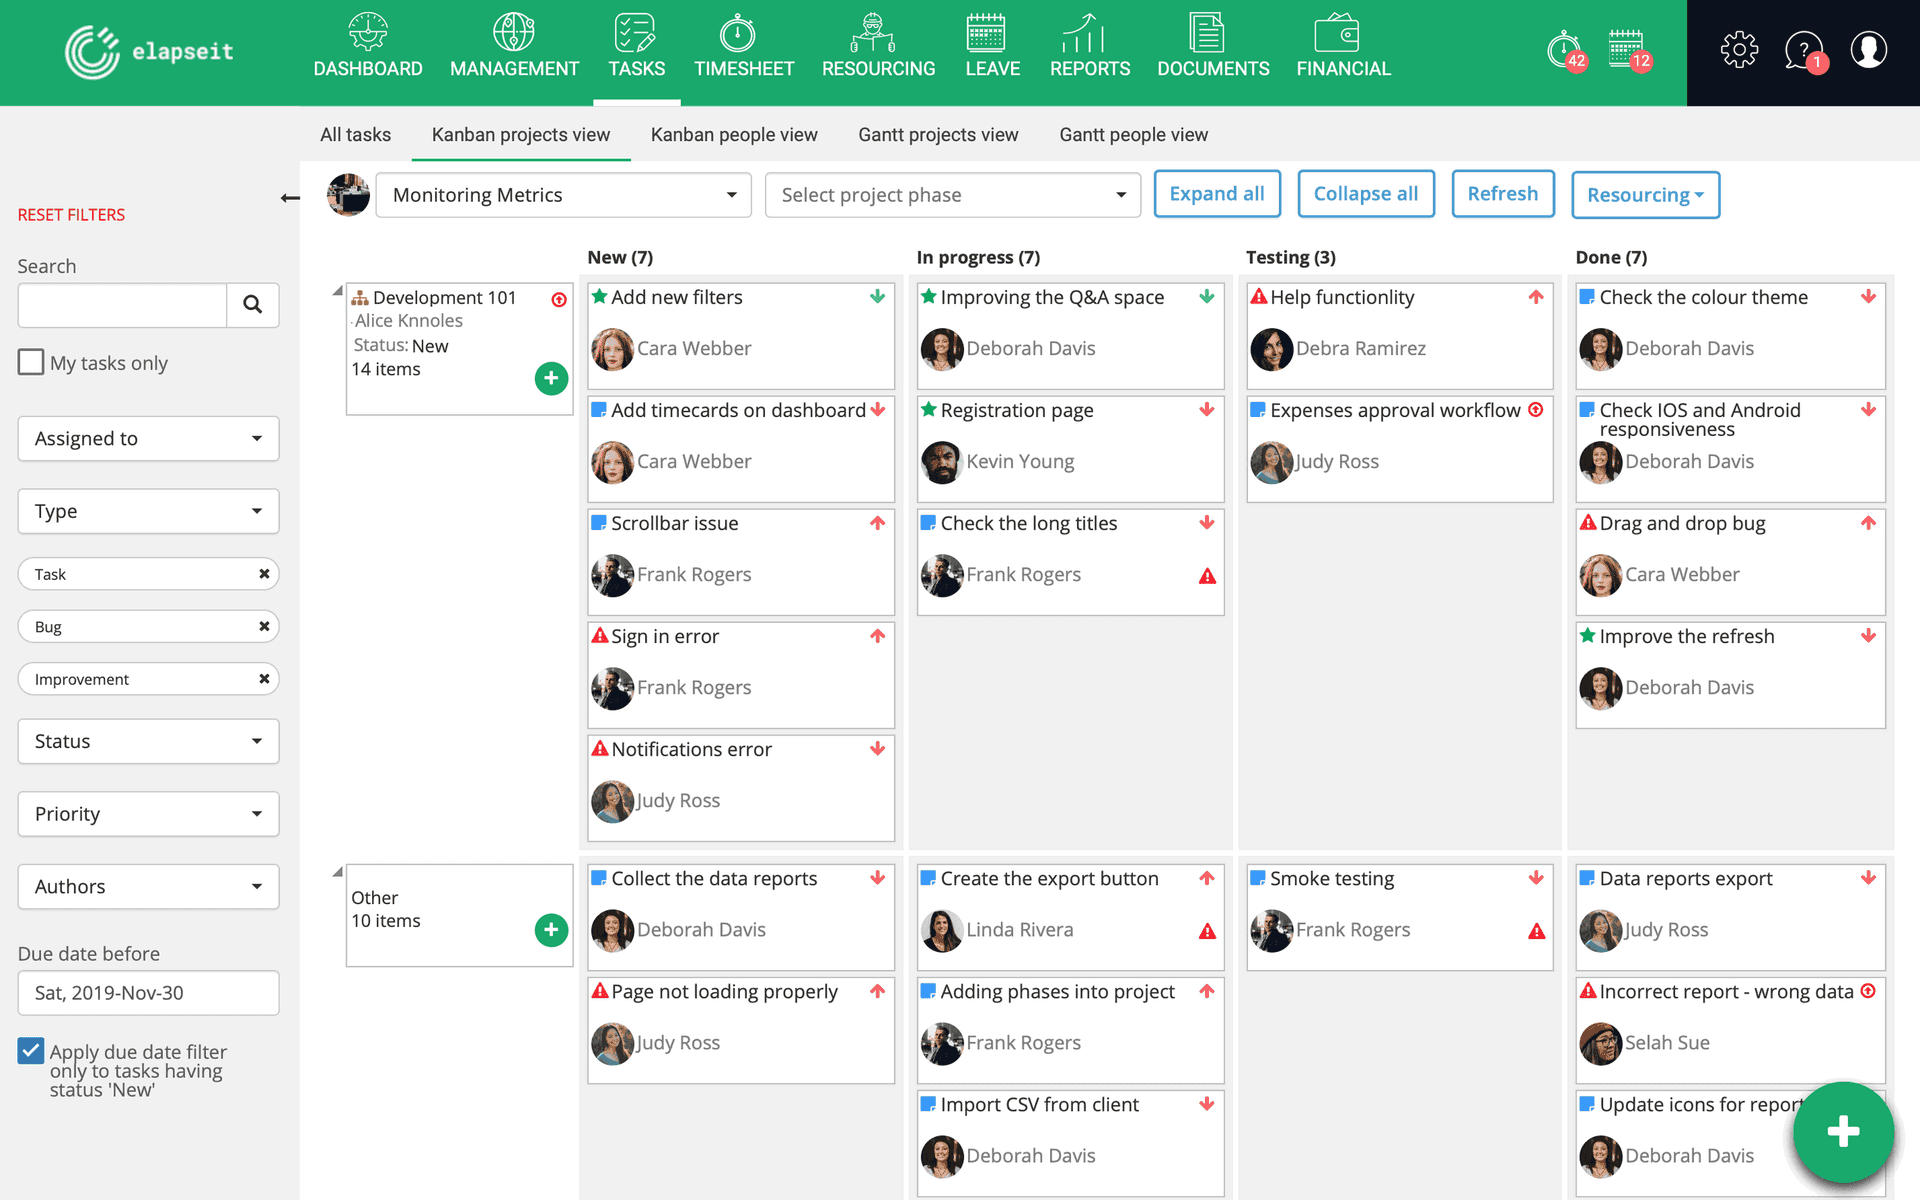 Kanban project view in elapseit